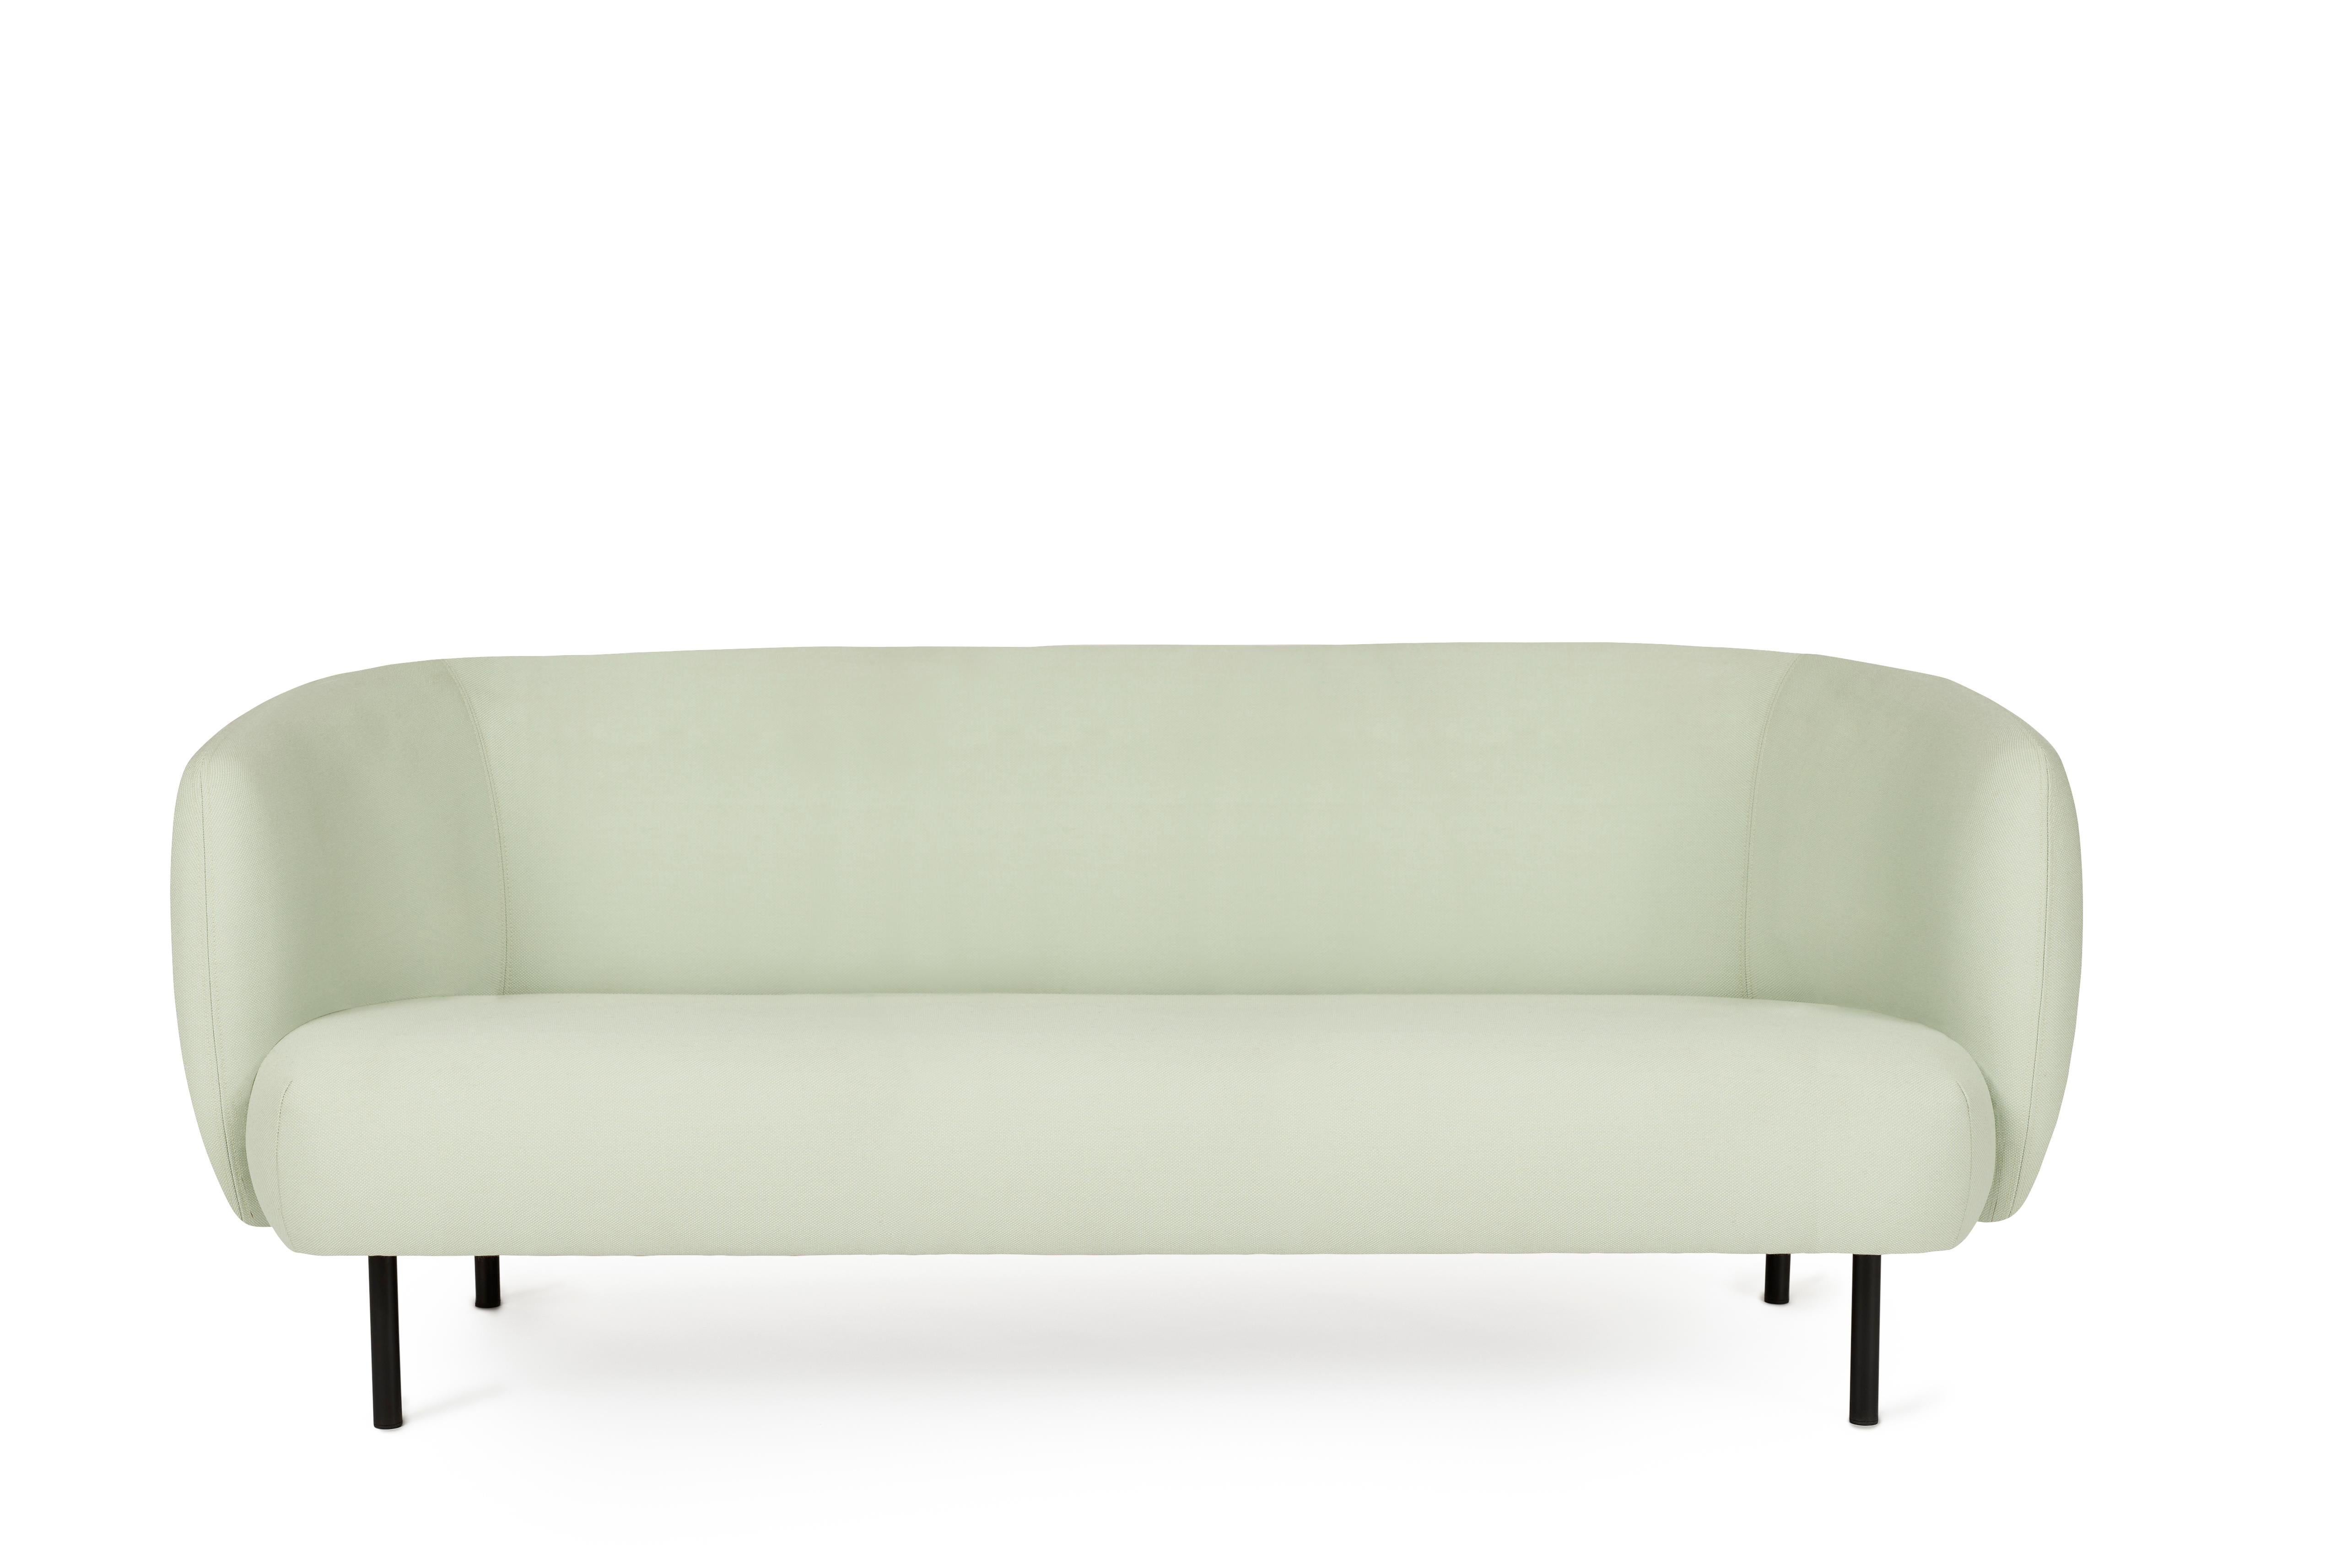 For Sale: Gray (Steelcut 935) Cape 3-Seat Sofa, by Charlotte Høncke from Warm Nordic